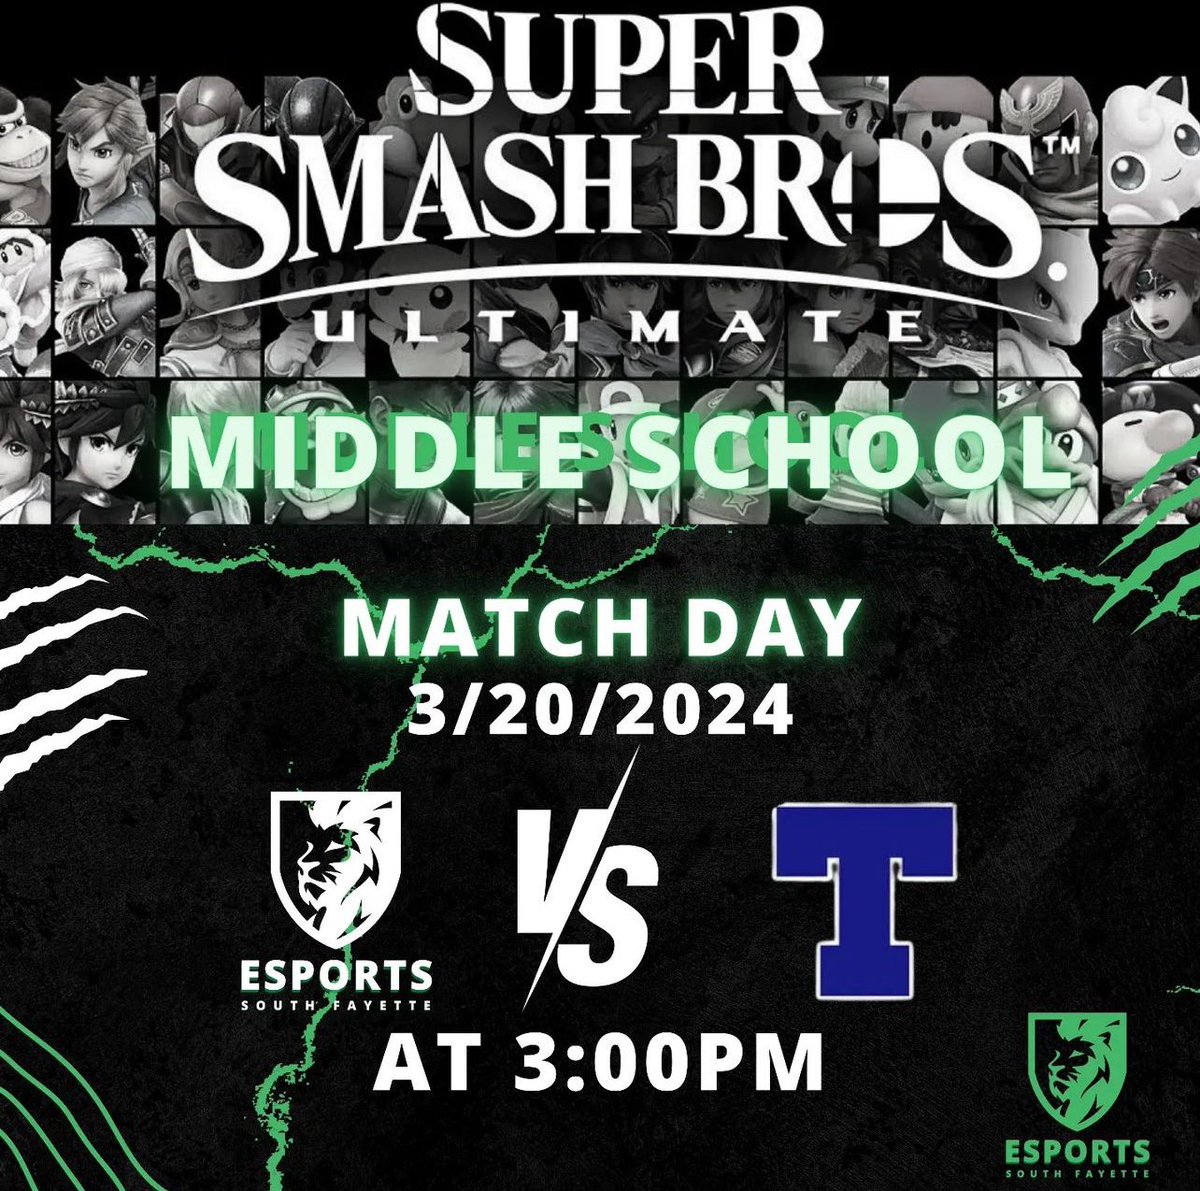 Our Middle School Esports Team is playing Trinity MS in Super Smash Bros. at 3:00 PM! #SFMSLionPride #SFLionPride